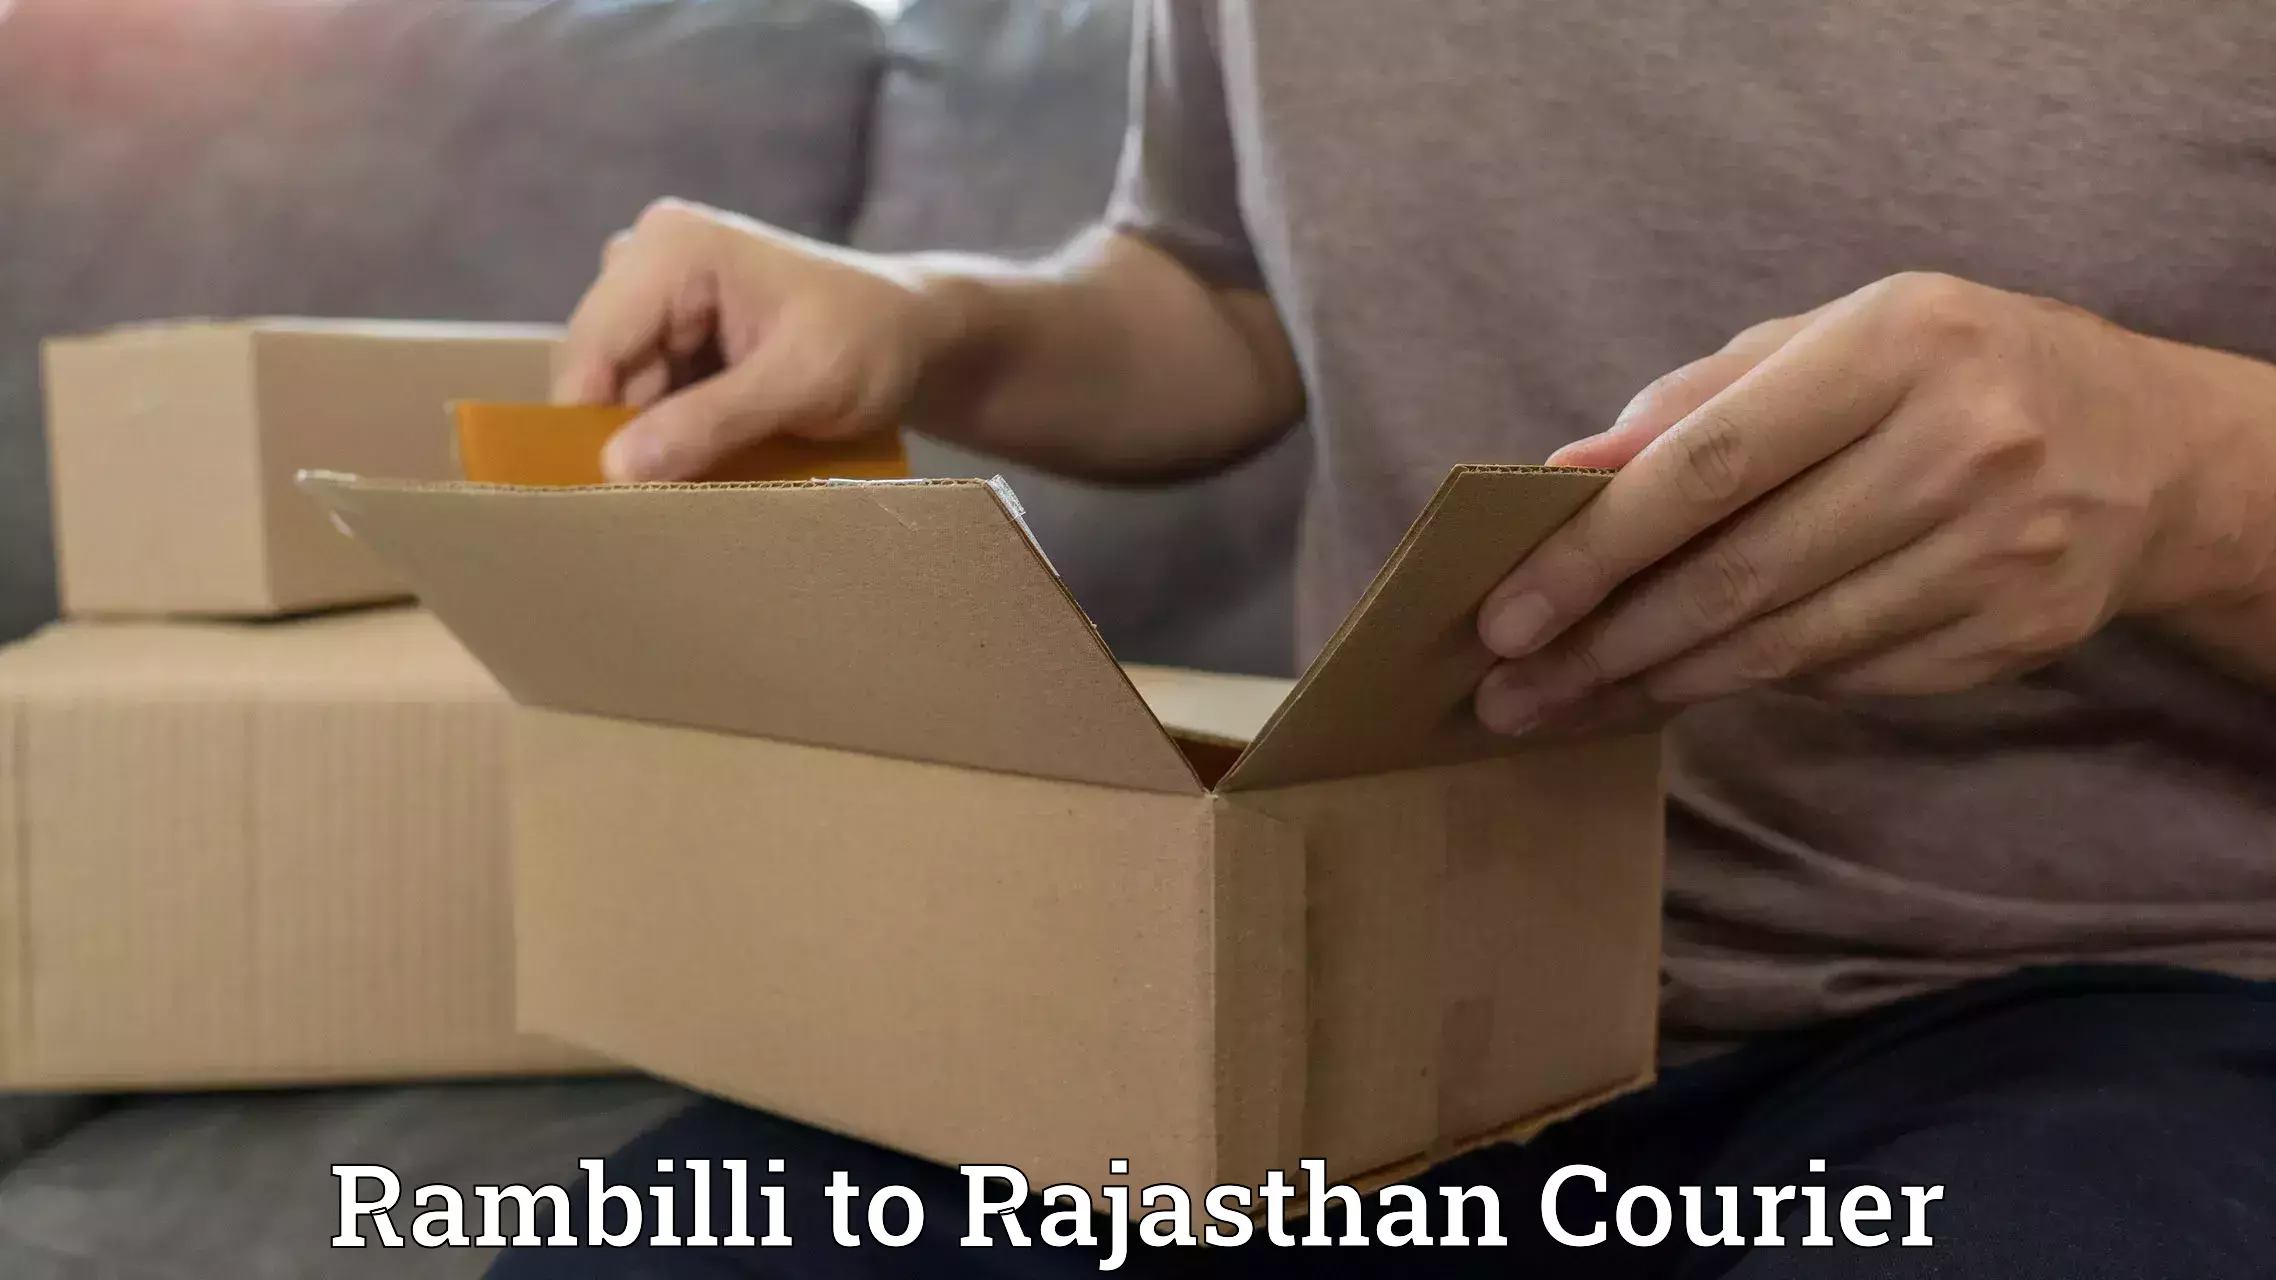 Large-scale shipping solutions Rambilli to Piparcity